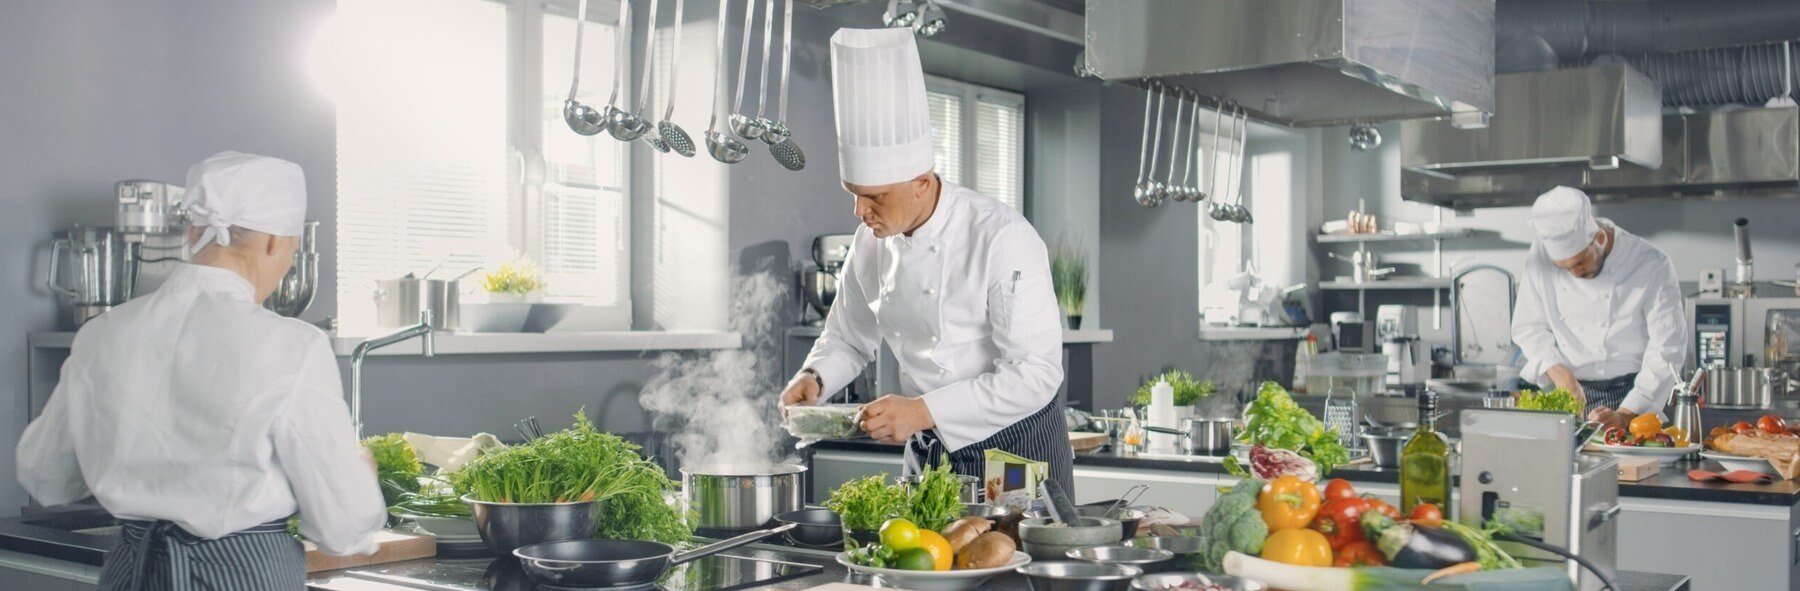 Chefs cooking with liberty cookware